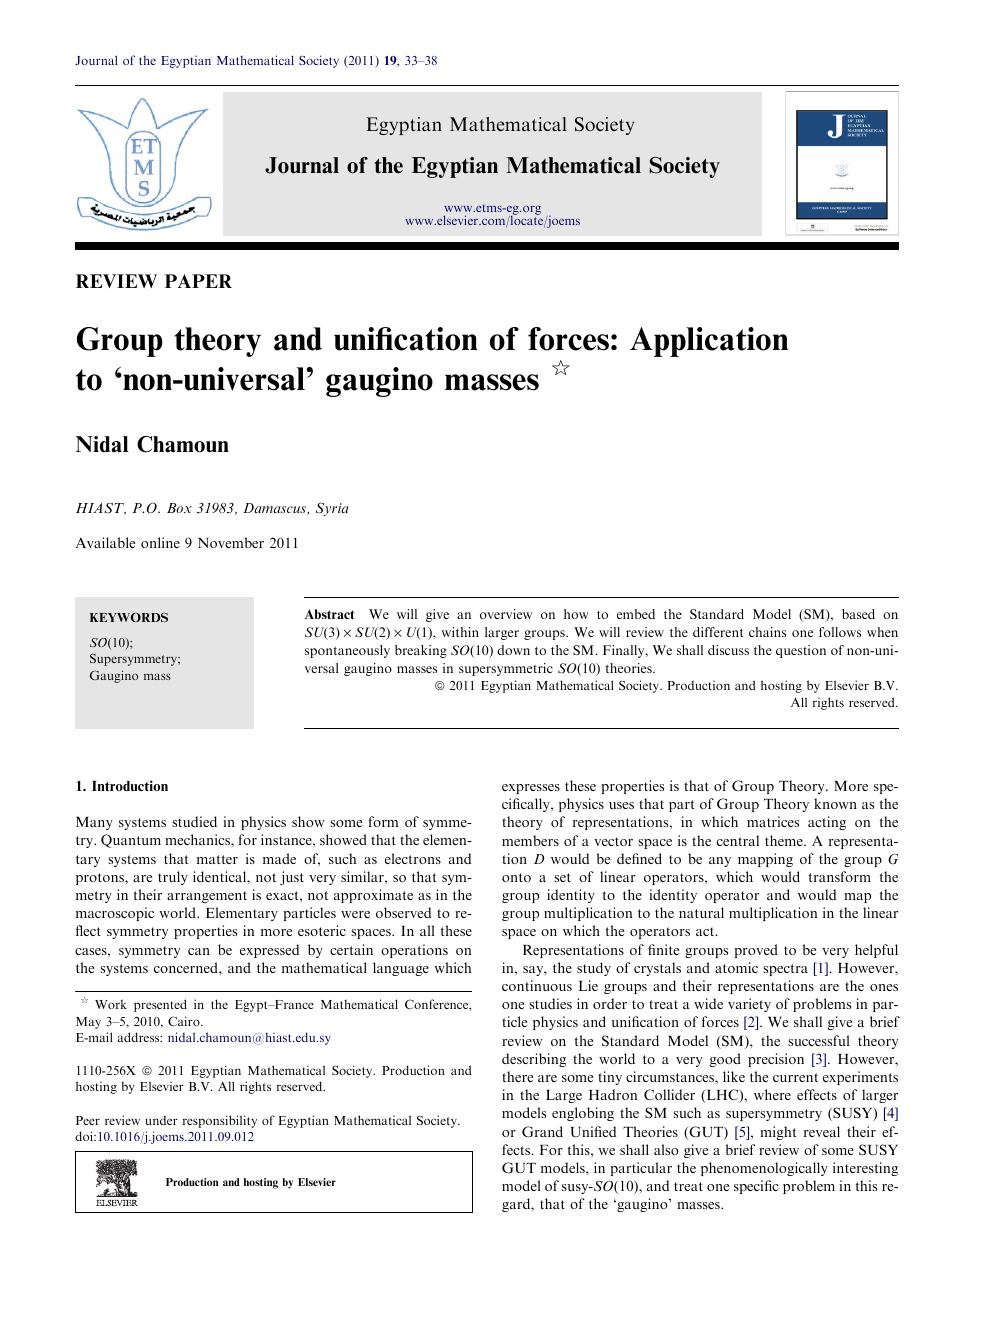 Group Theory And Unification Of Forces Application To Non Universal Gaugino Masses Topic Of Research Paper In Physical Sciences Download Scholarly Article Pdf And Read For Free On Cyberleninka Open Science Hub